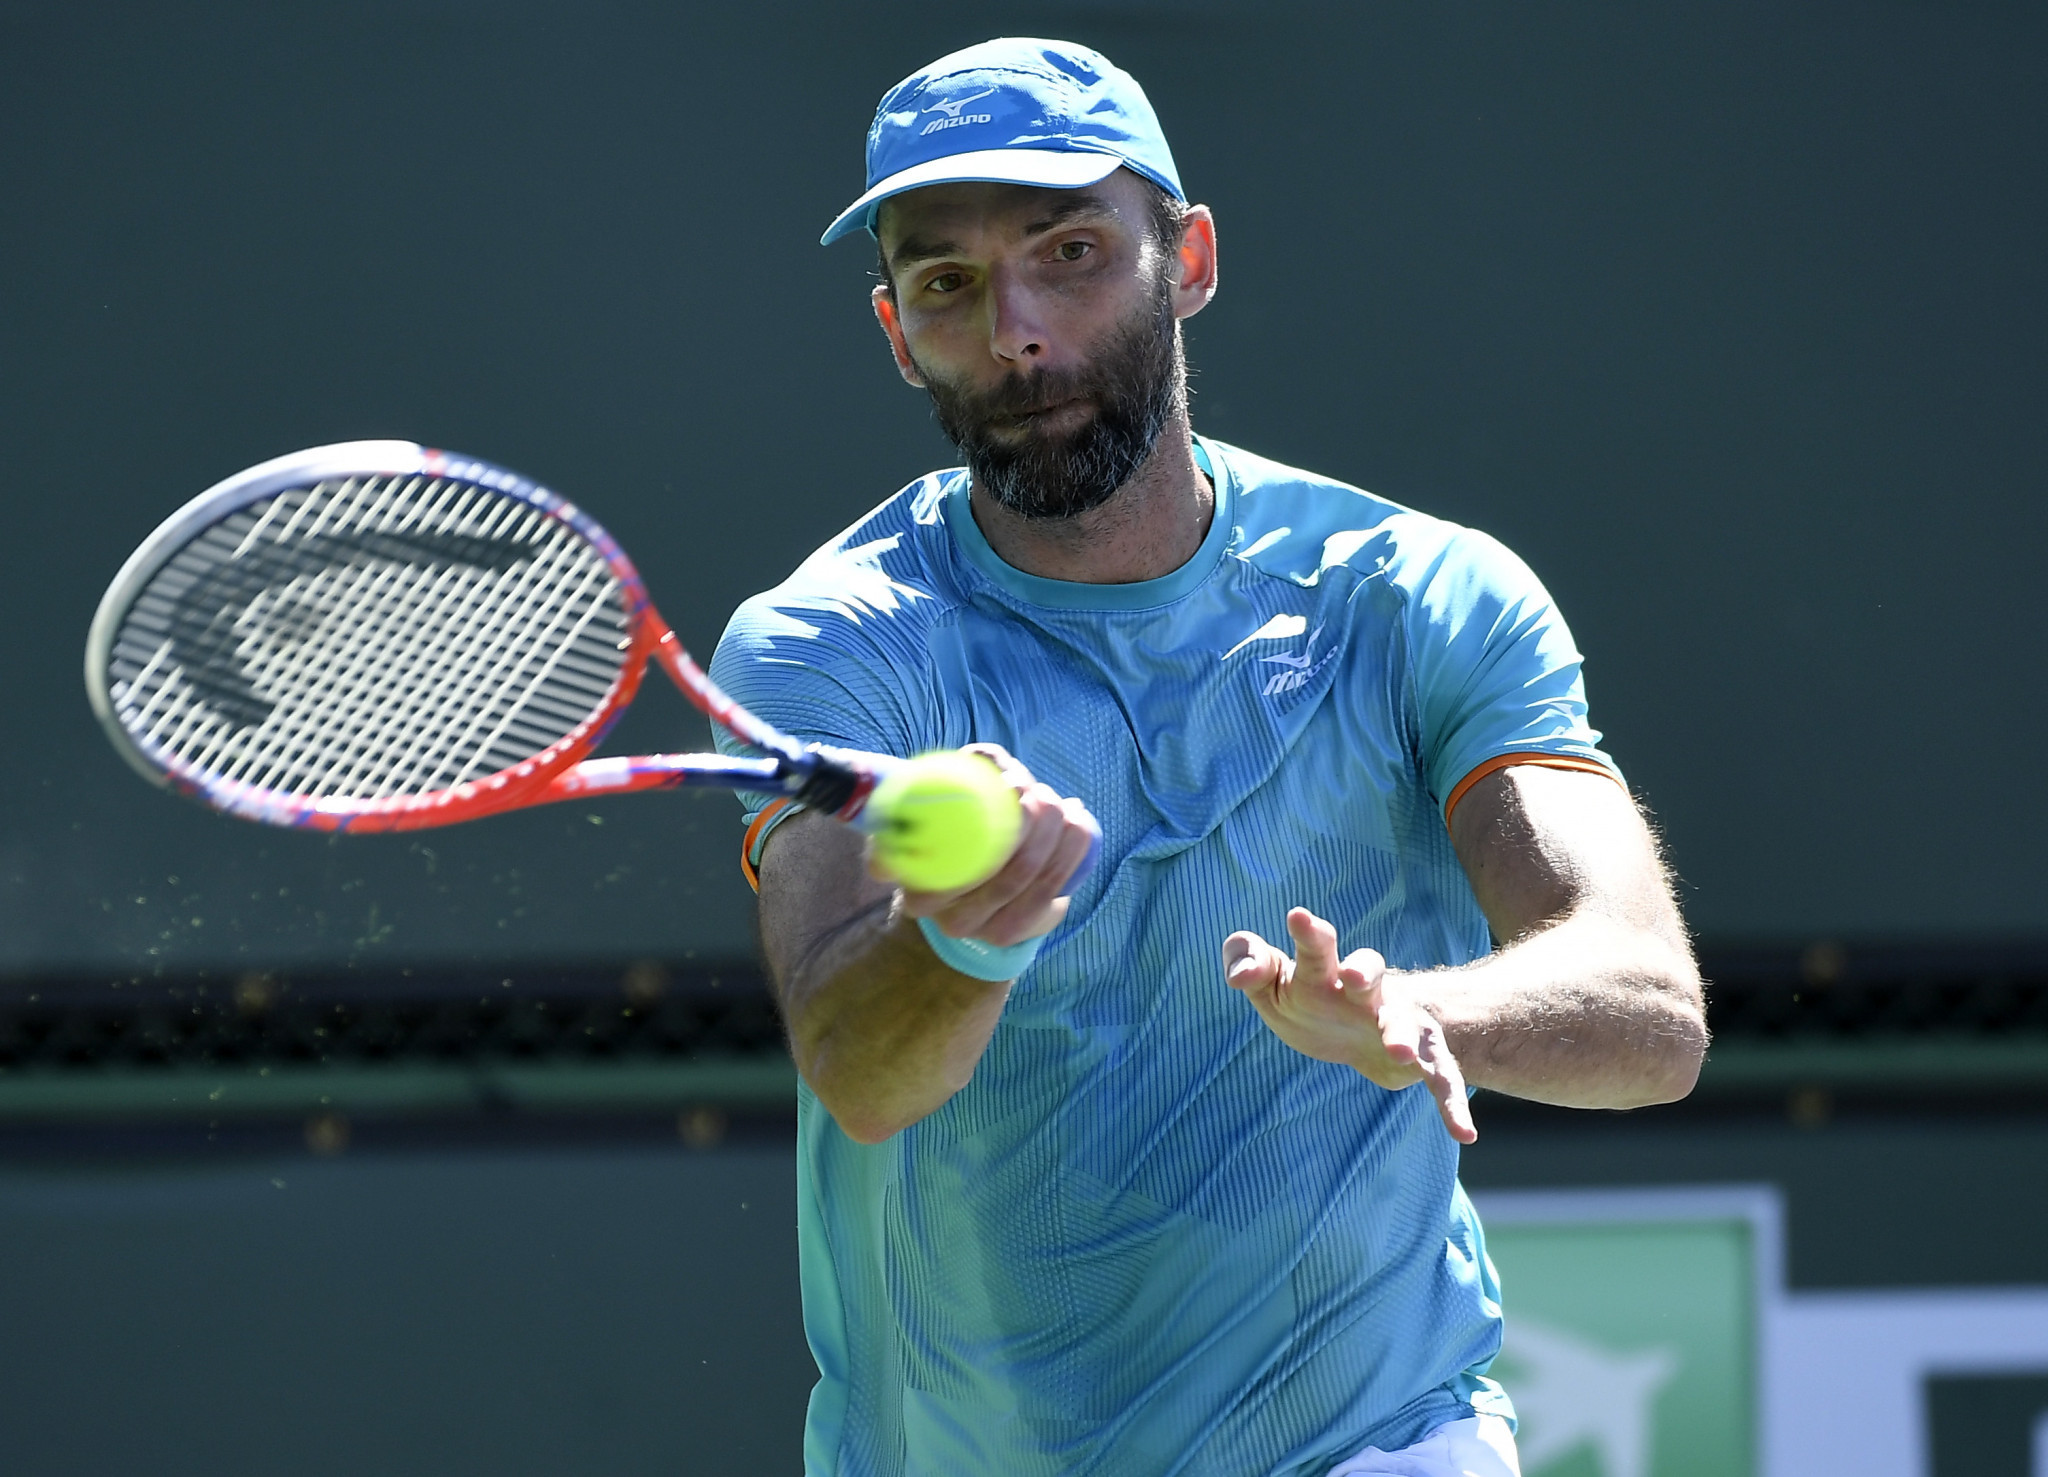 Ivo Karlović became the first player aged 40 and over to win an ATP Tour match in 24 years after beating Australia’s Matthew Edben to reach the second round of the Masters 1000 event in Indian Wells ©Getty Images